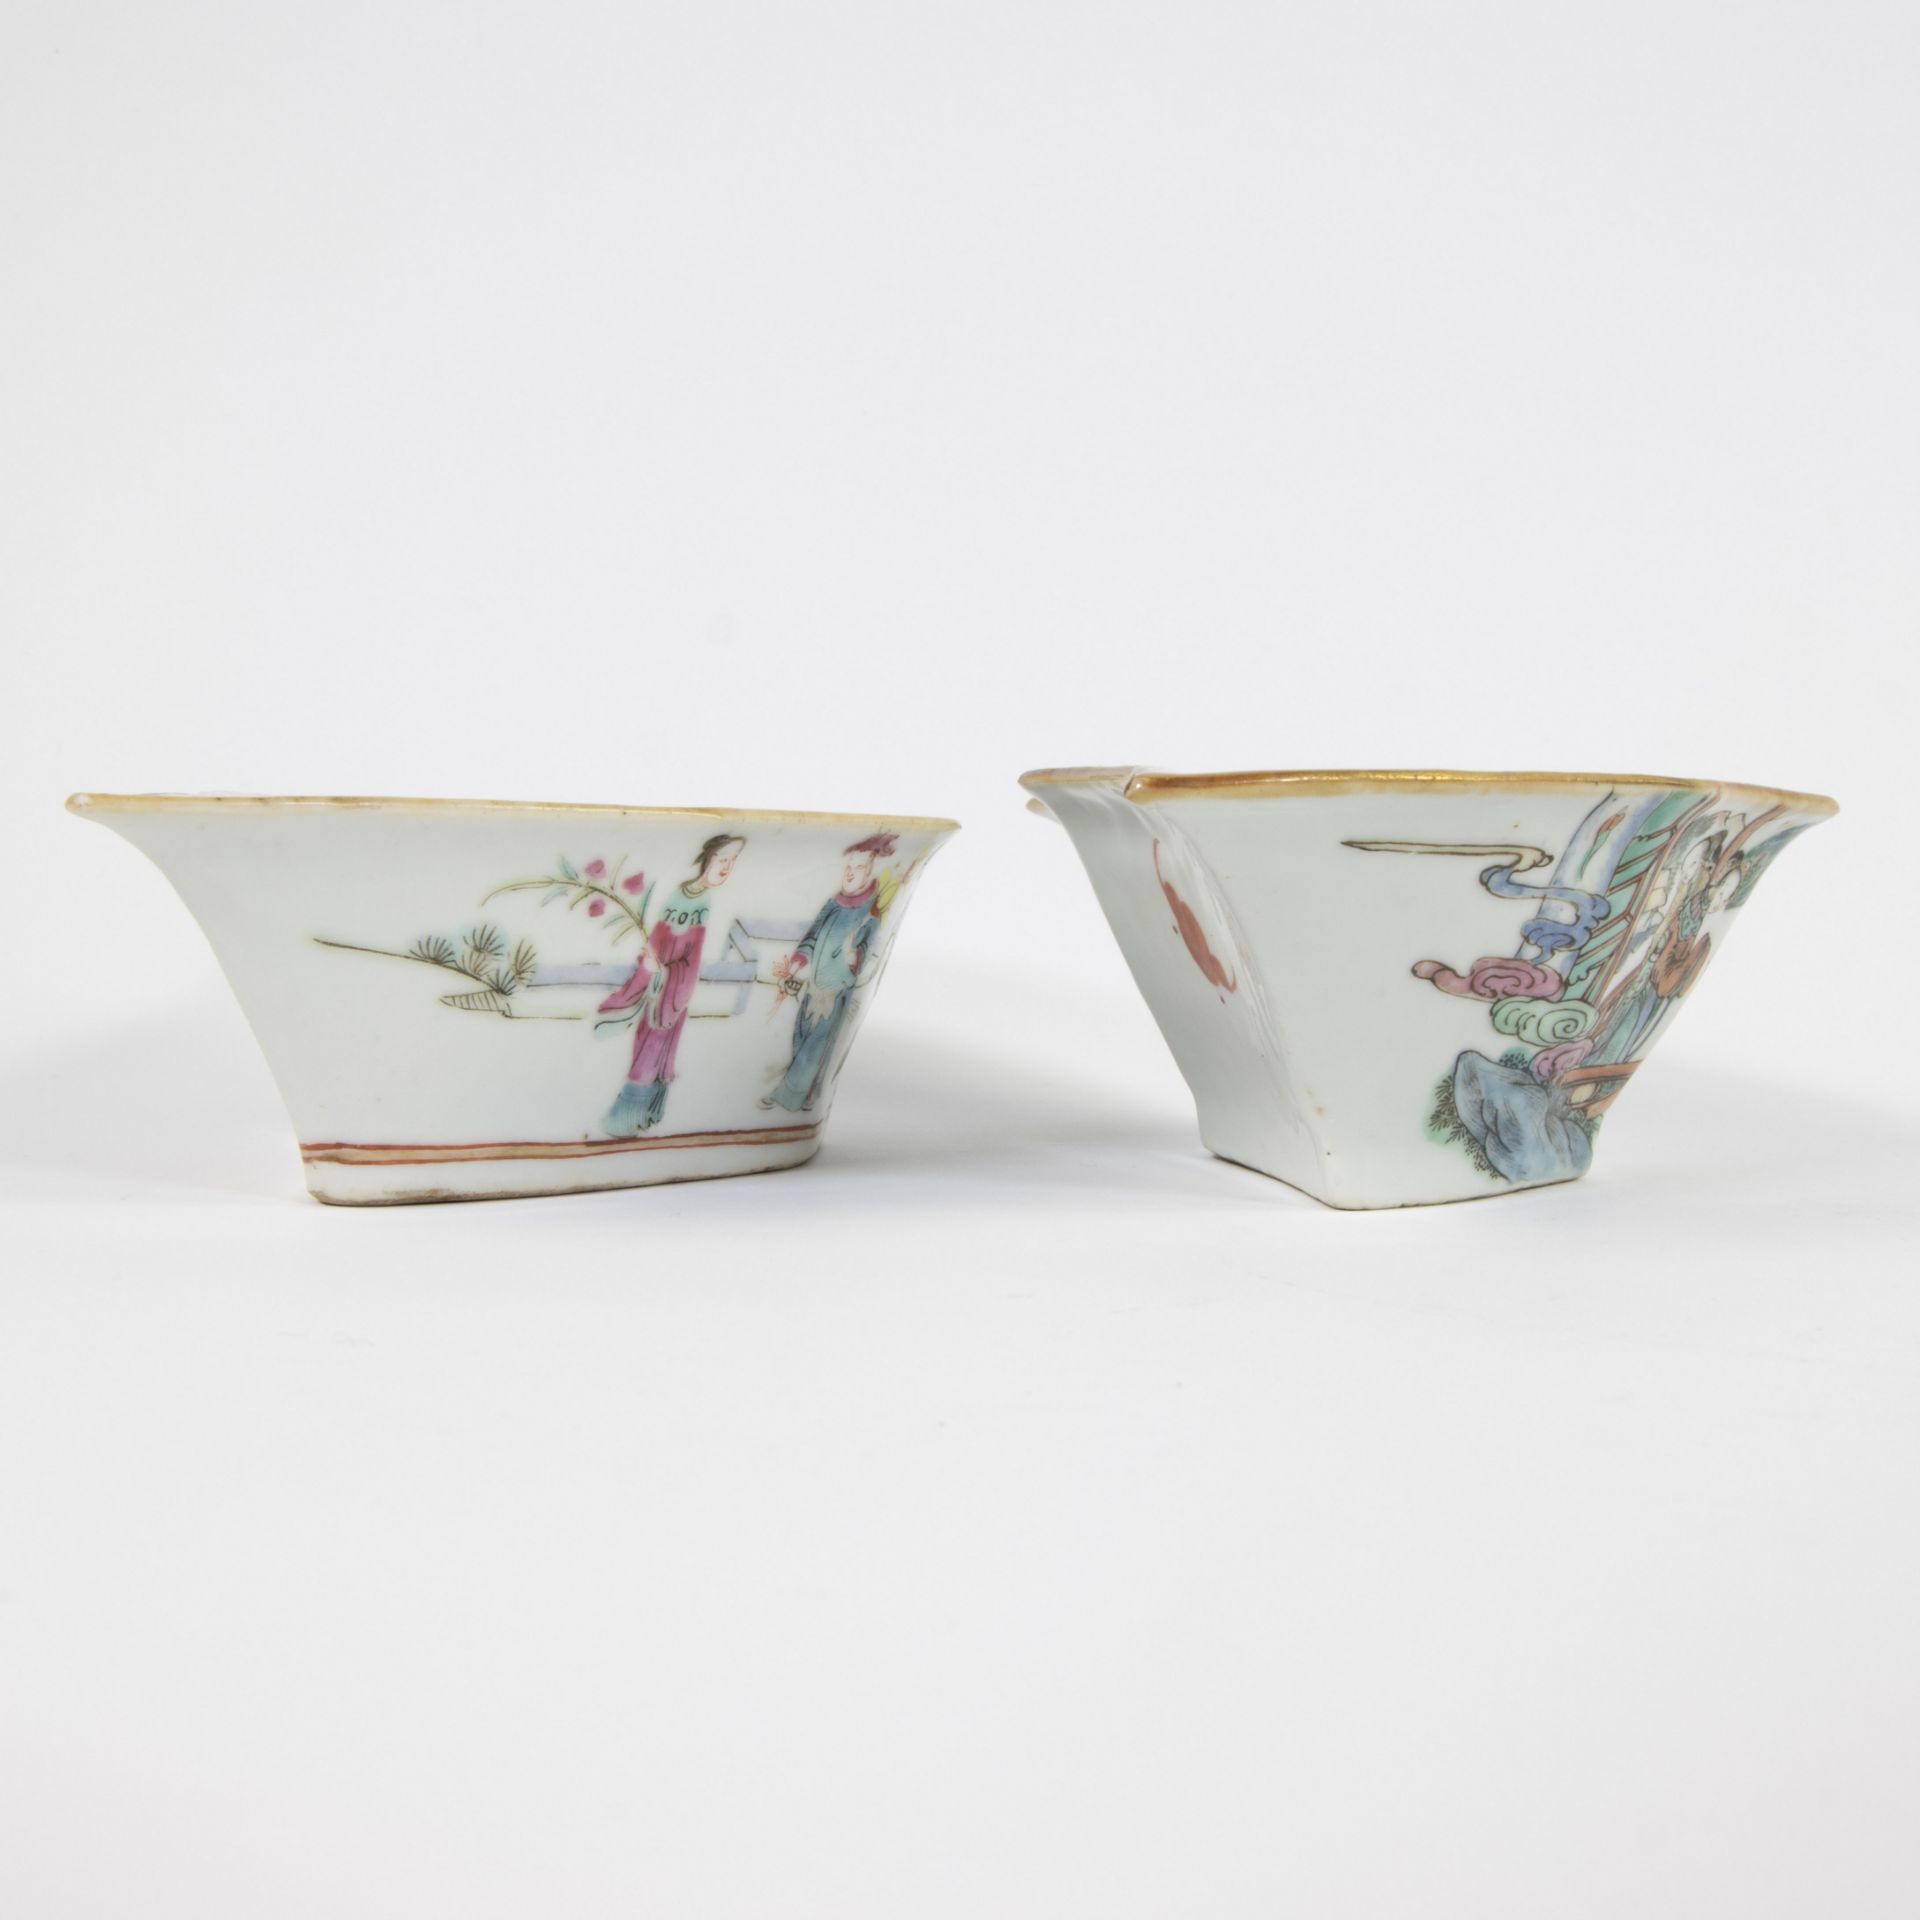 Collection Chinese 2 bowls 1 marked Tongxhi and Imari plate 18th century - Image 7 of 9